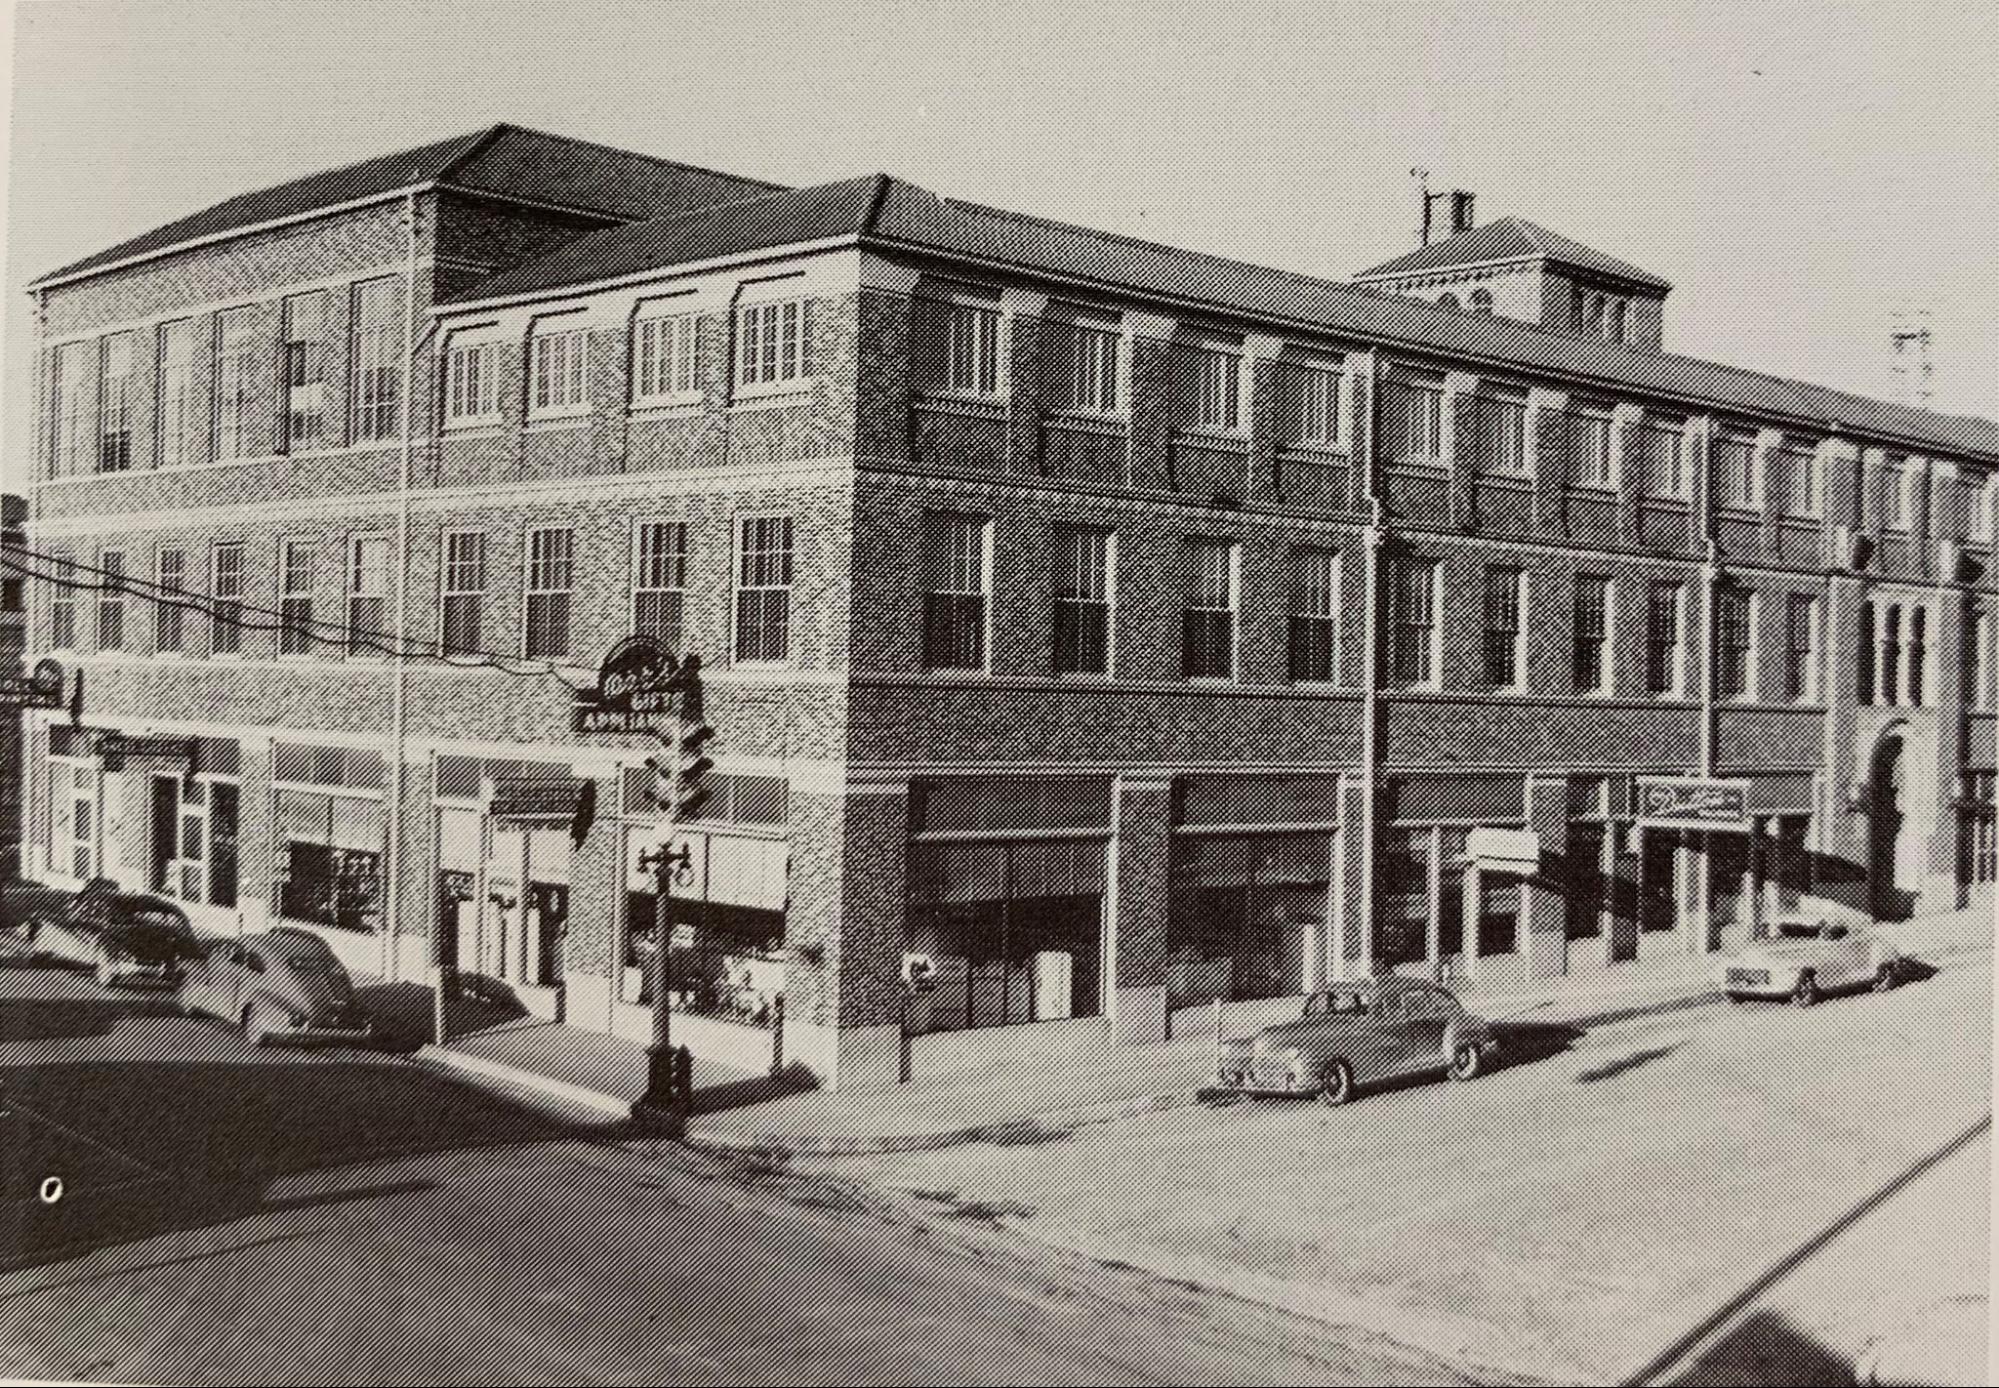 An old photo of a historic building in downtown Waco, Texas. 